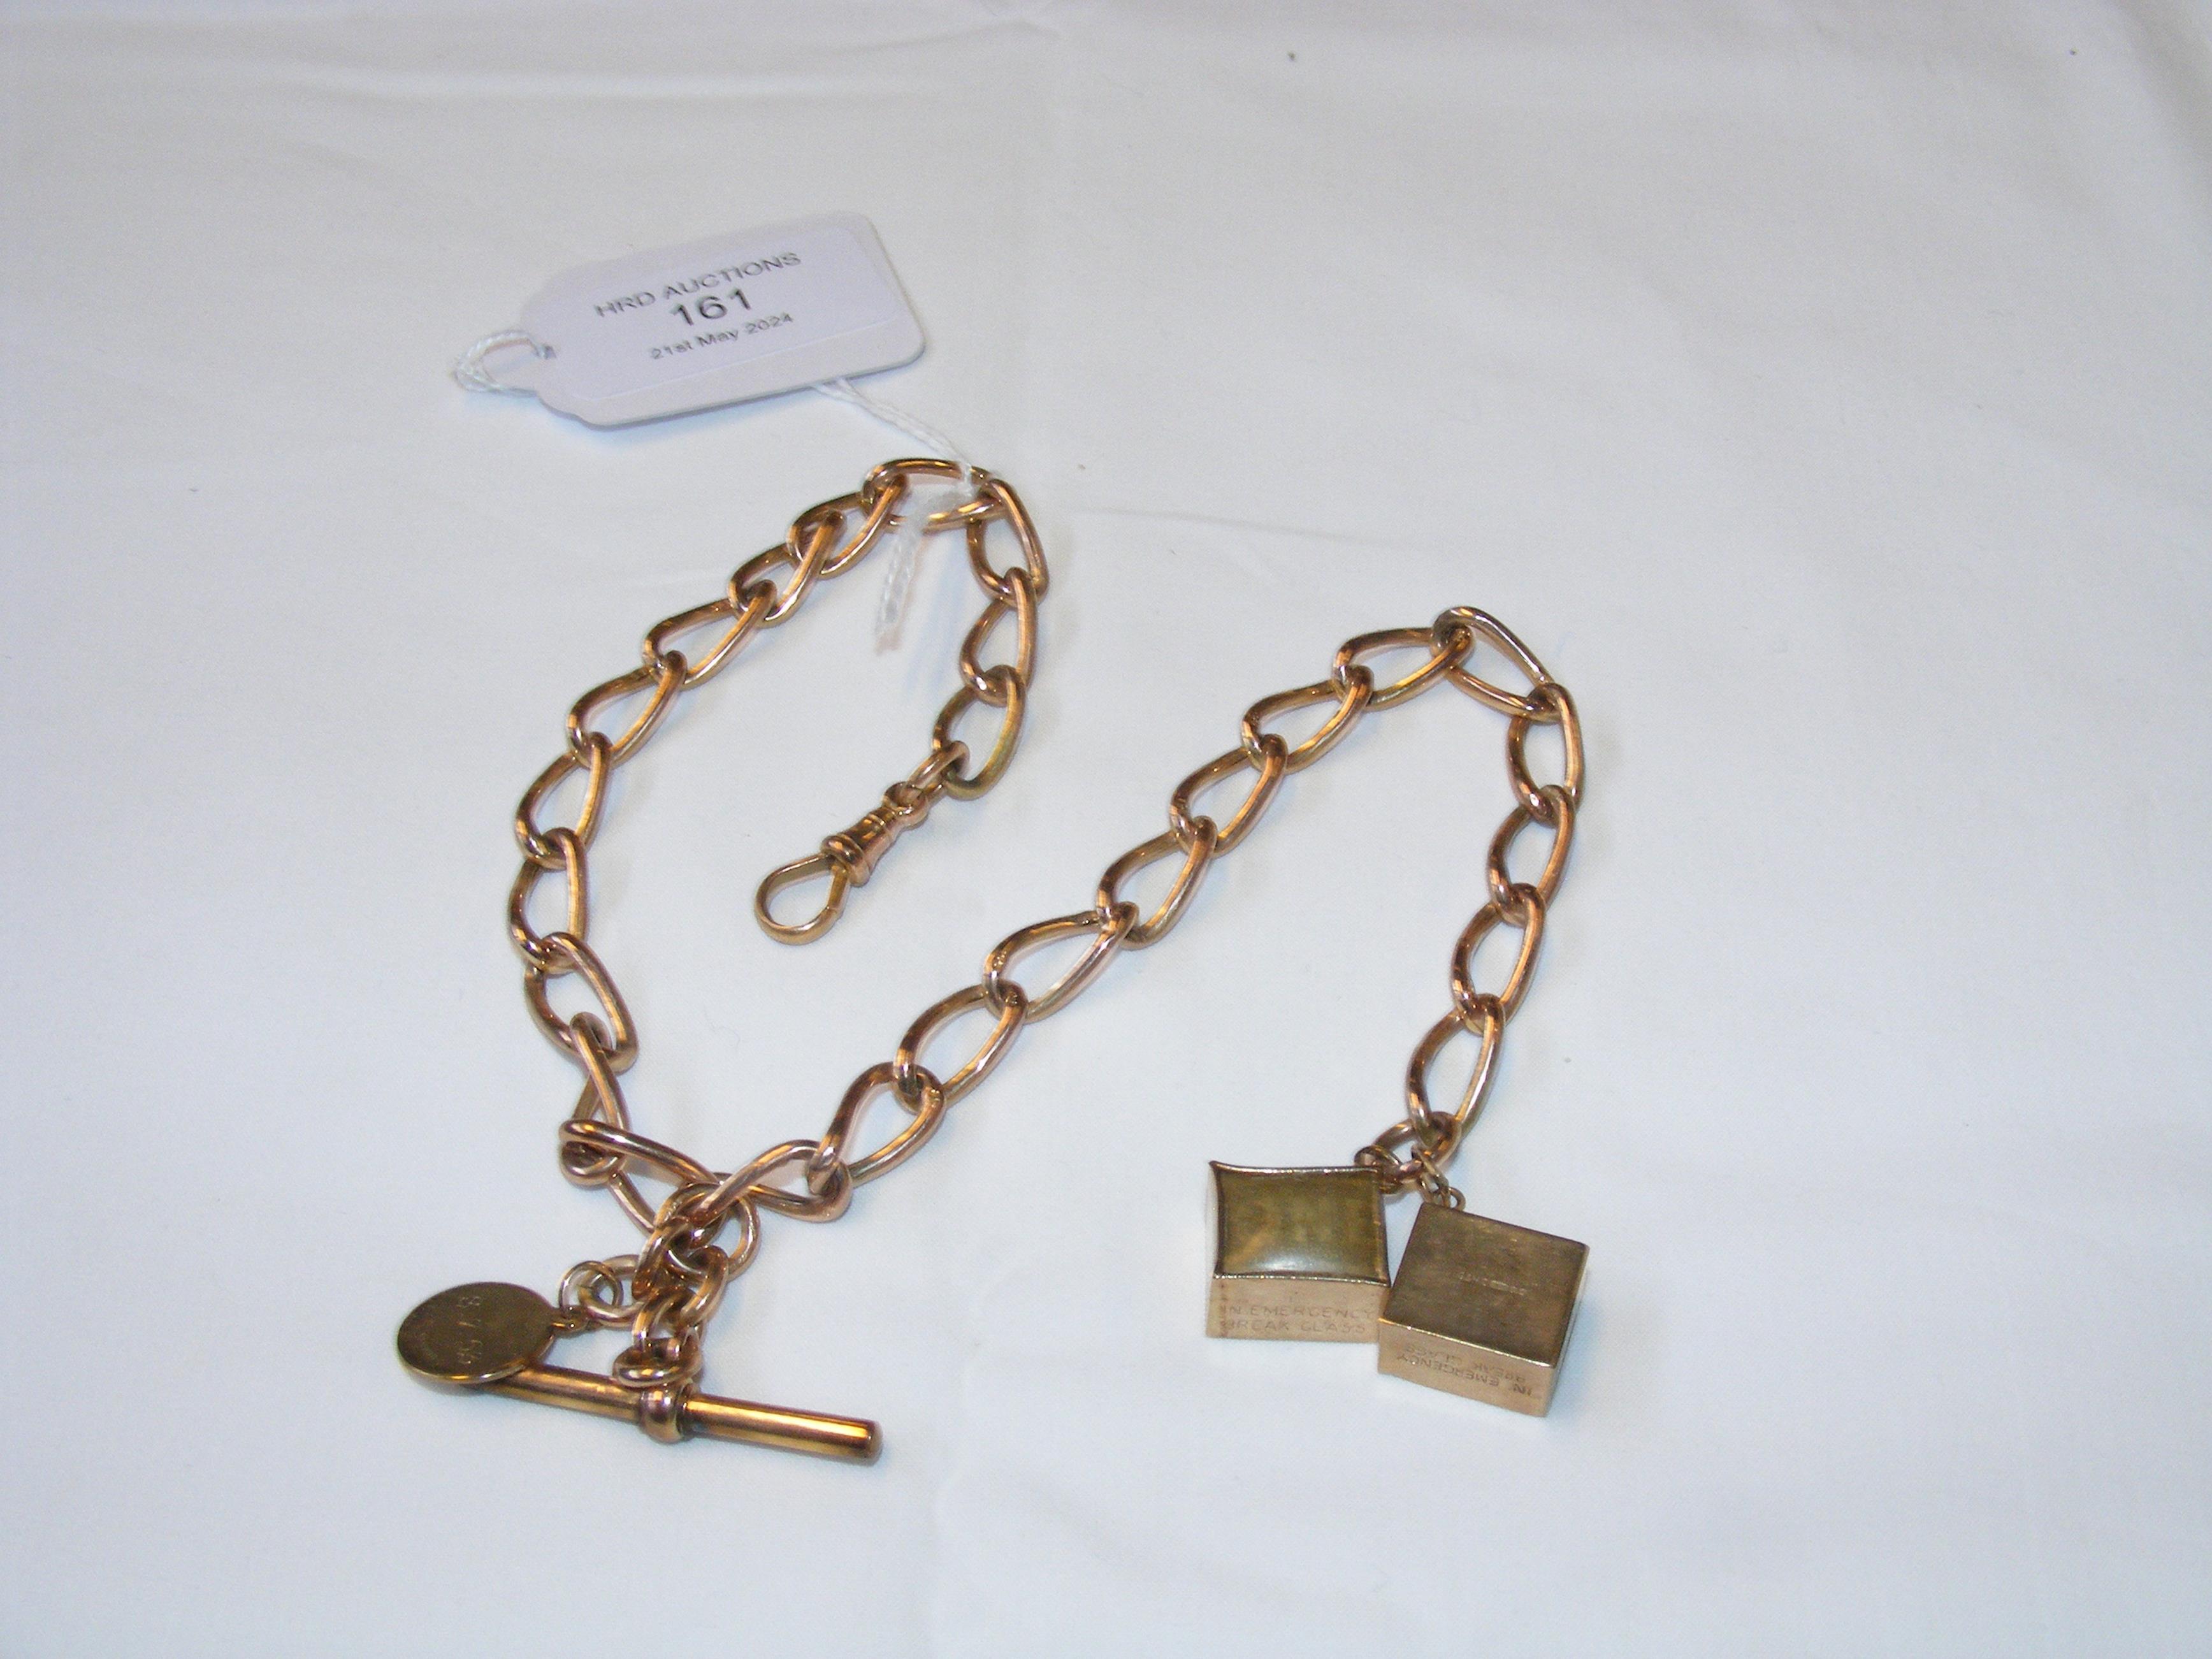 A 9ct watch chain with two charms